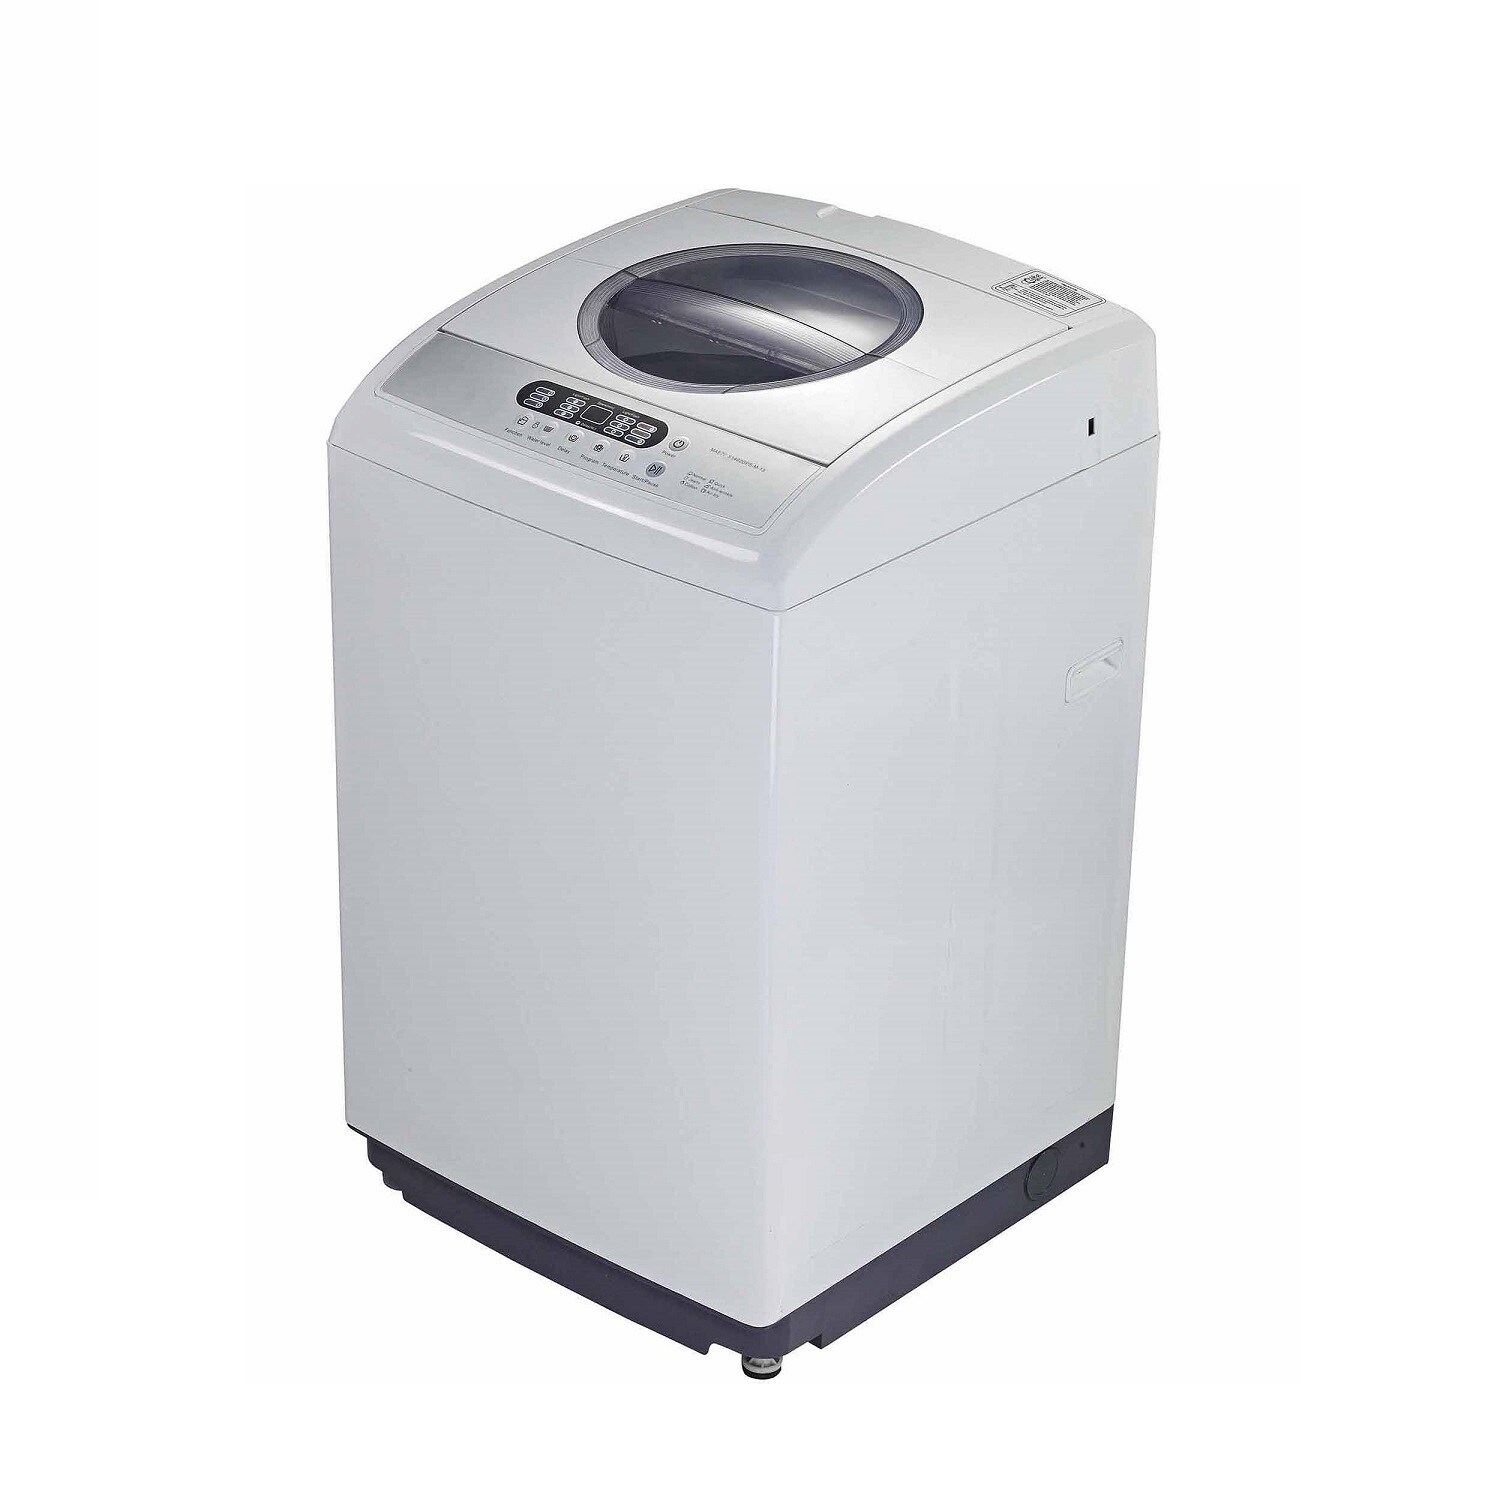 RCA 2.5 Cu. Ft. Portable Washer 